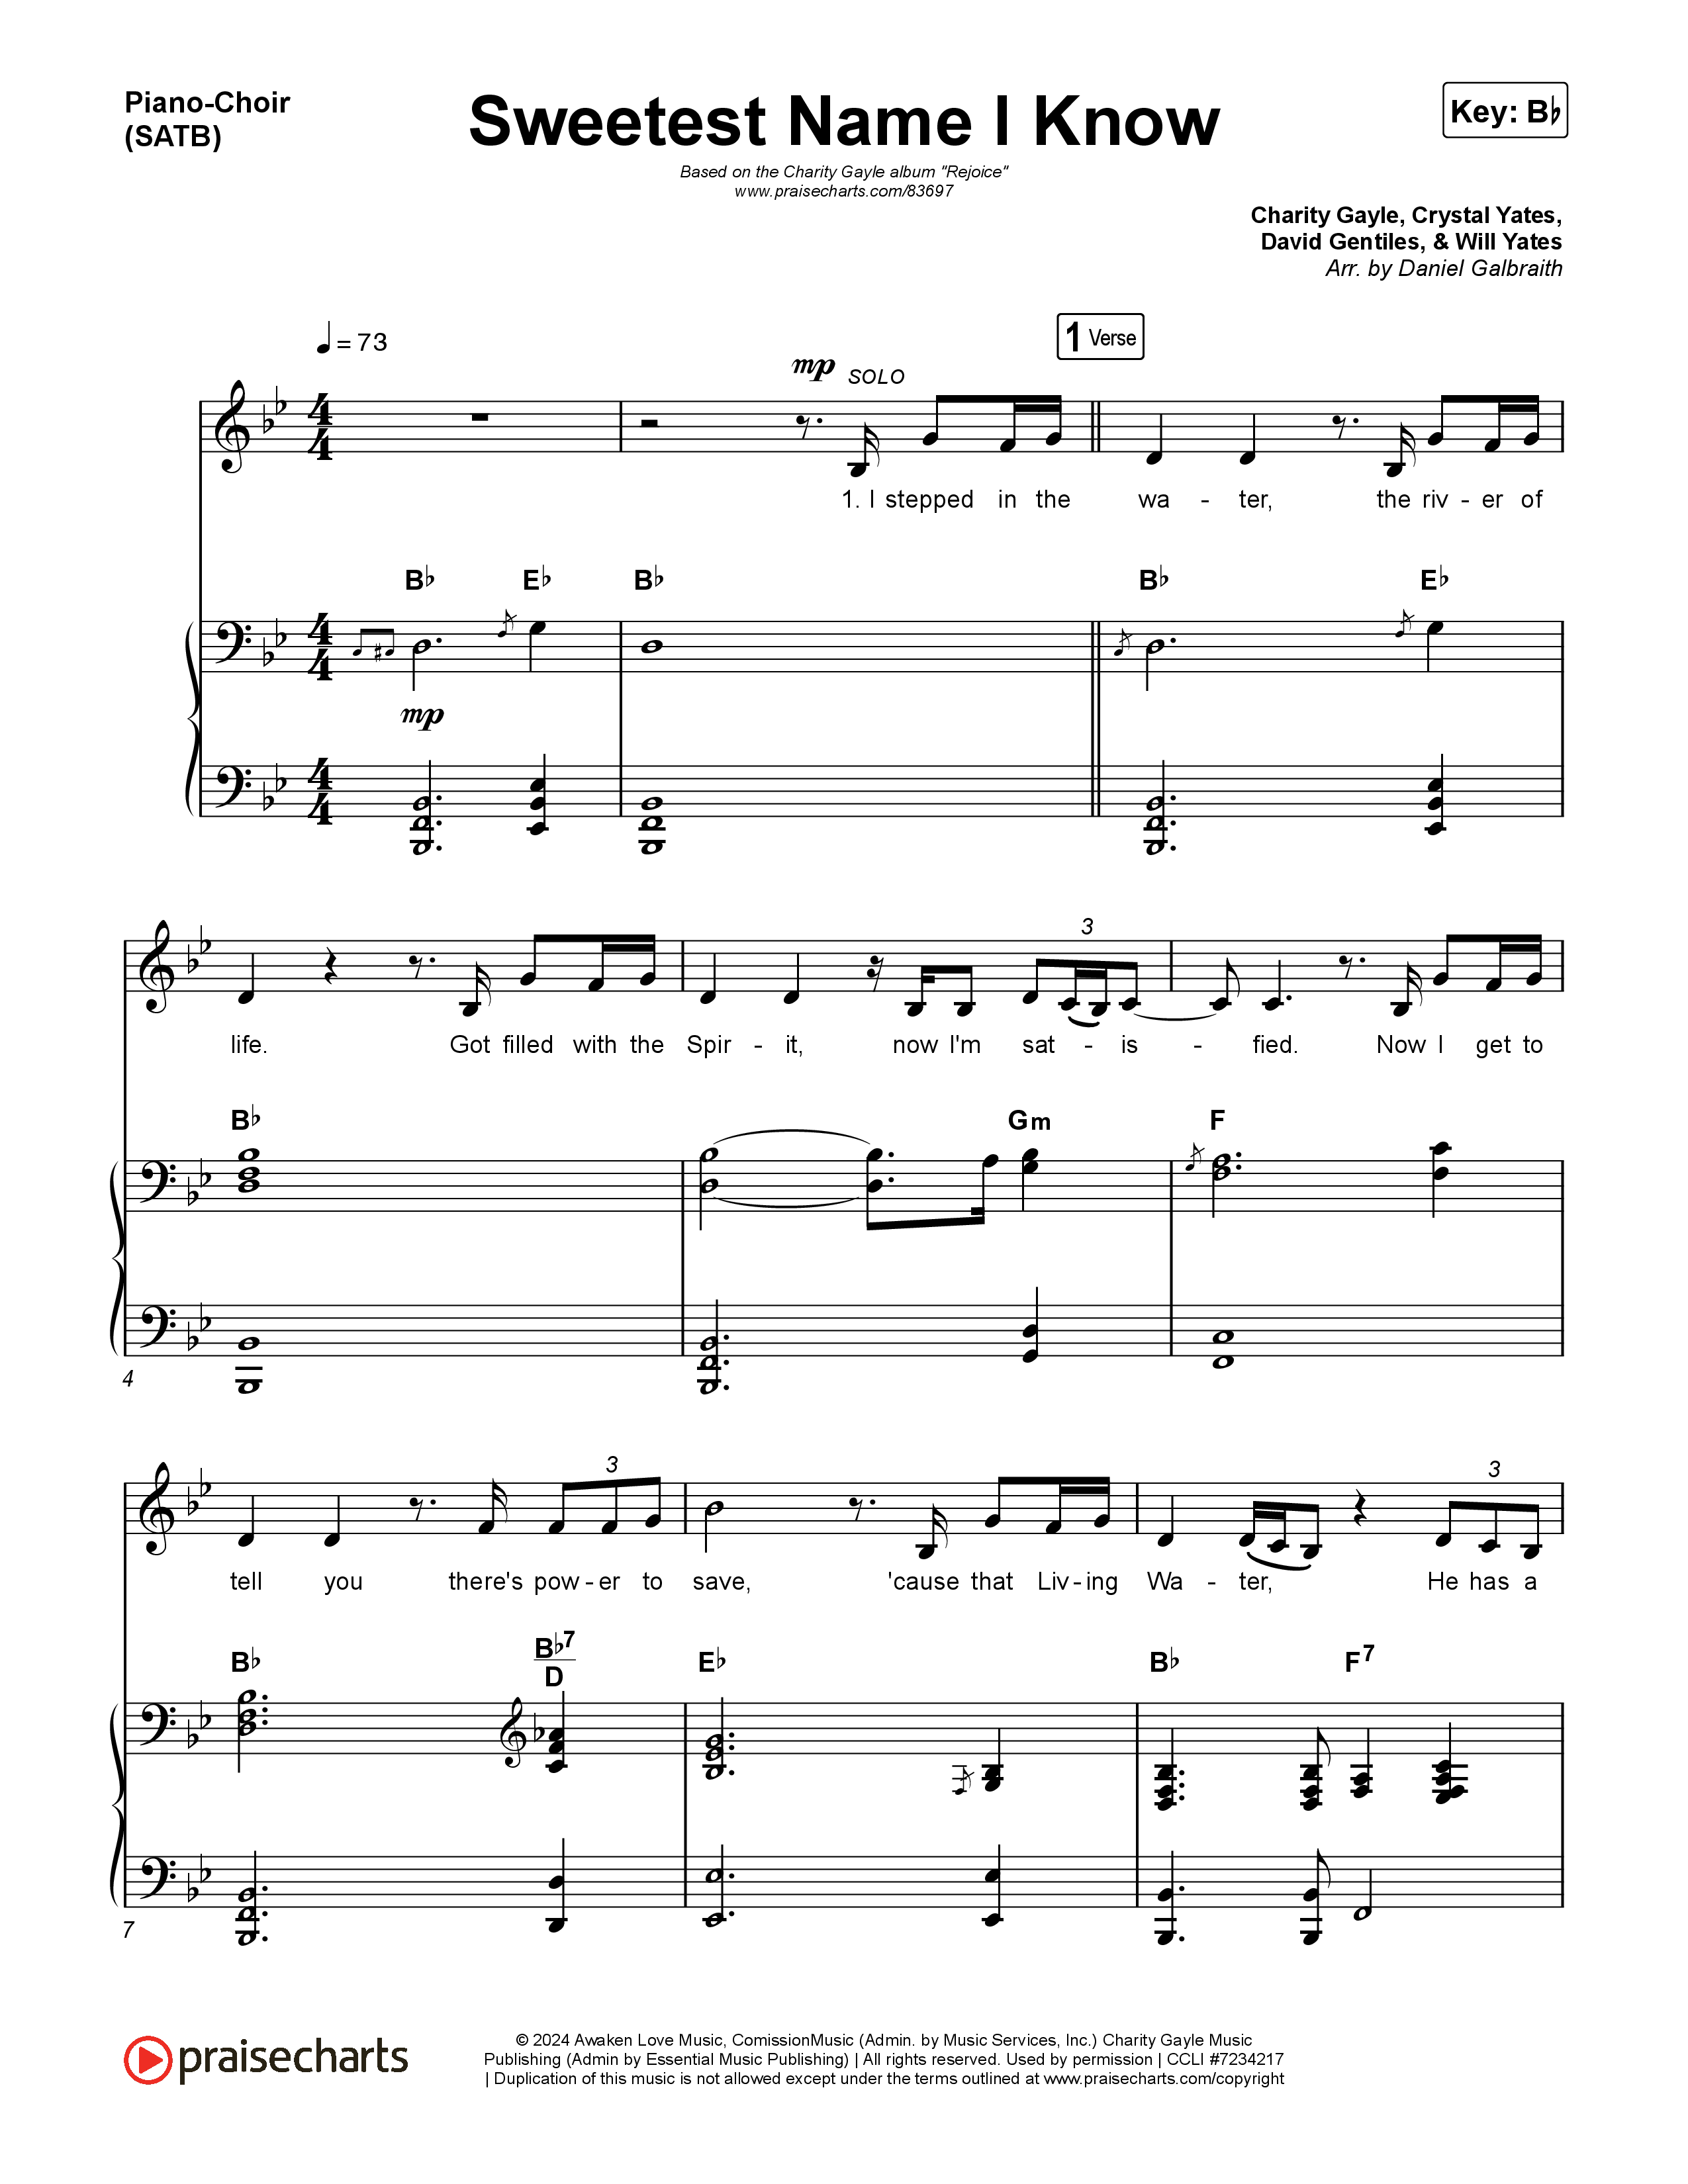 Sweetest Name I Know Piano/Vocal (SATB) (Charity Gayle)